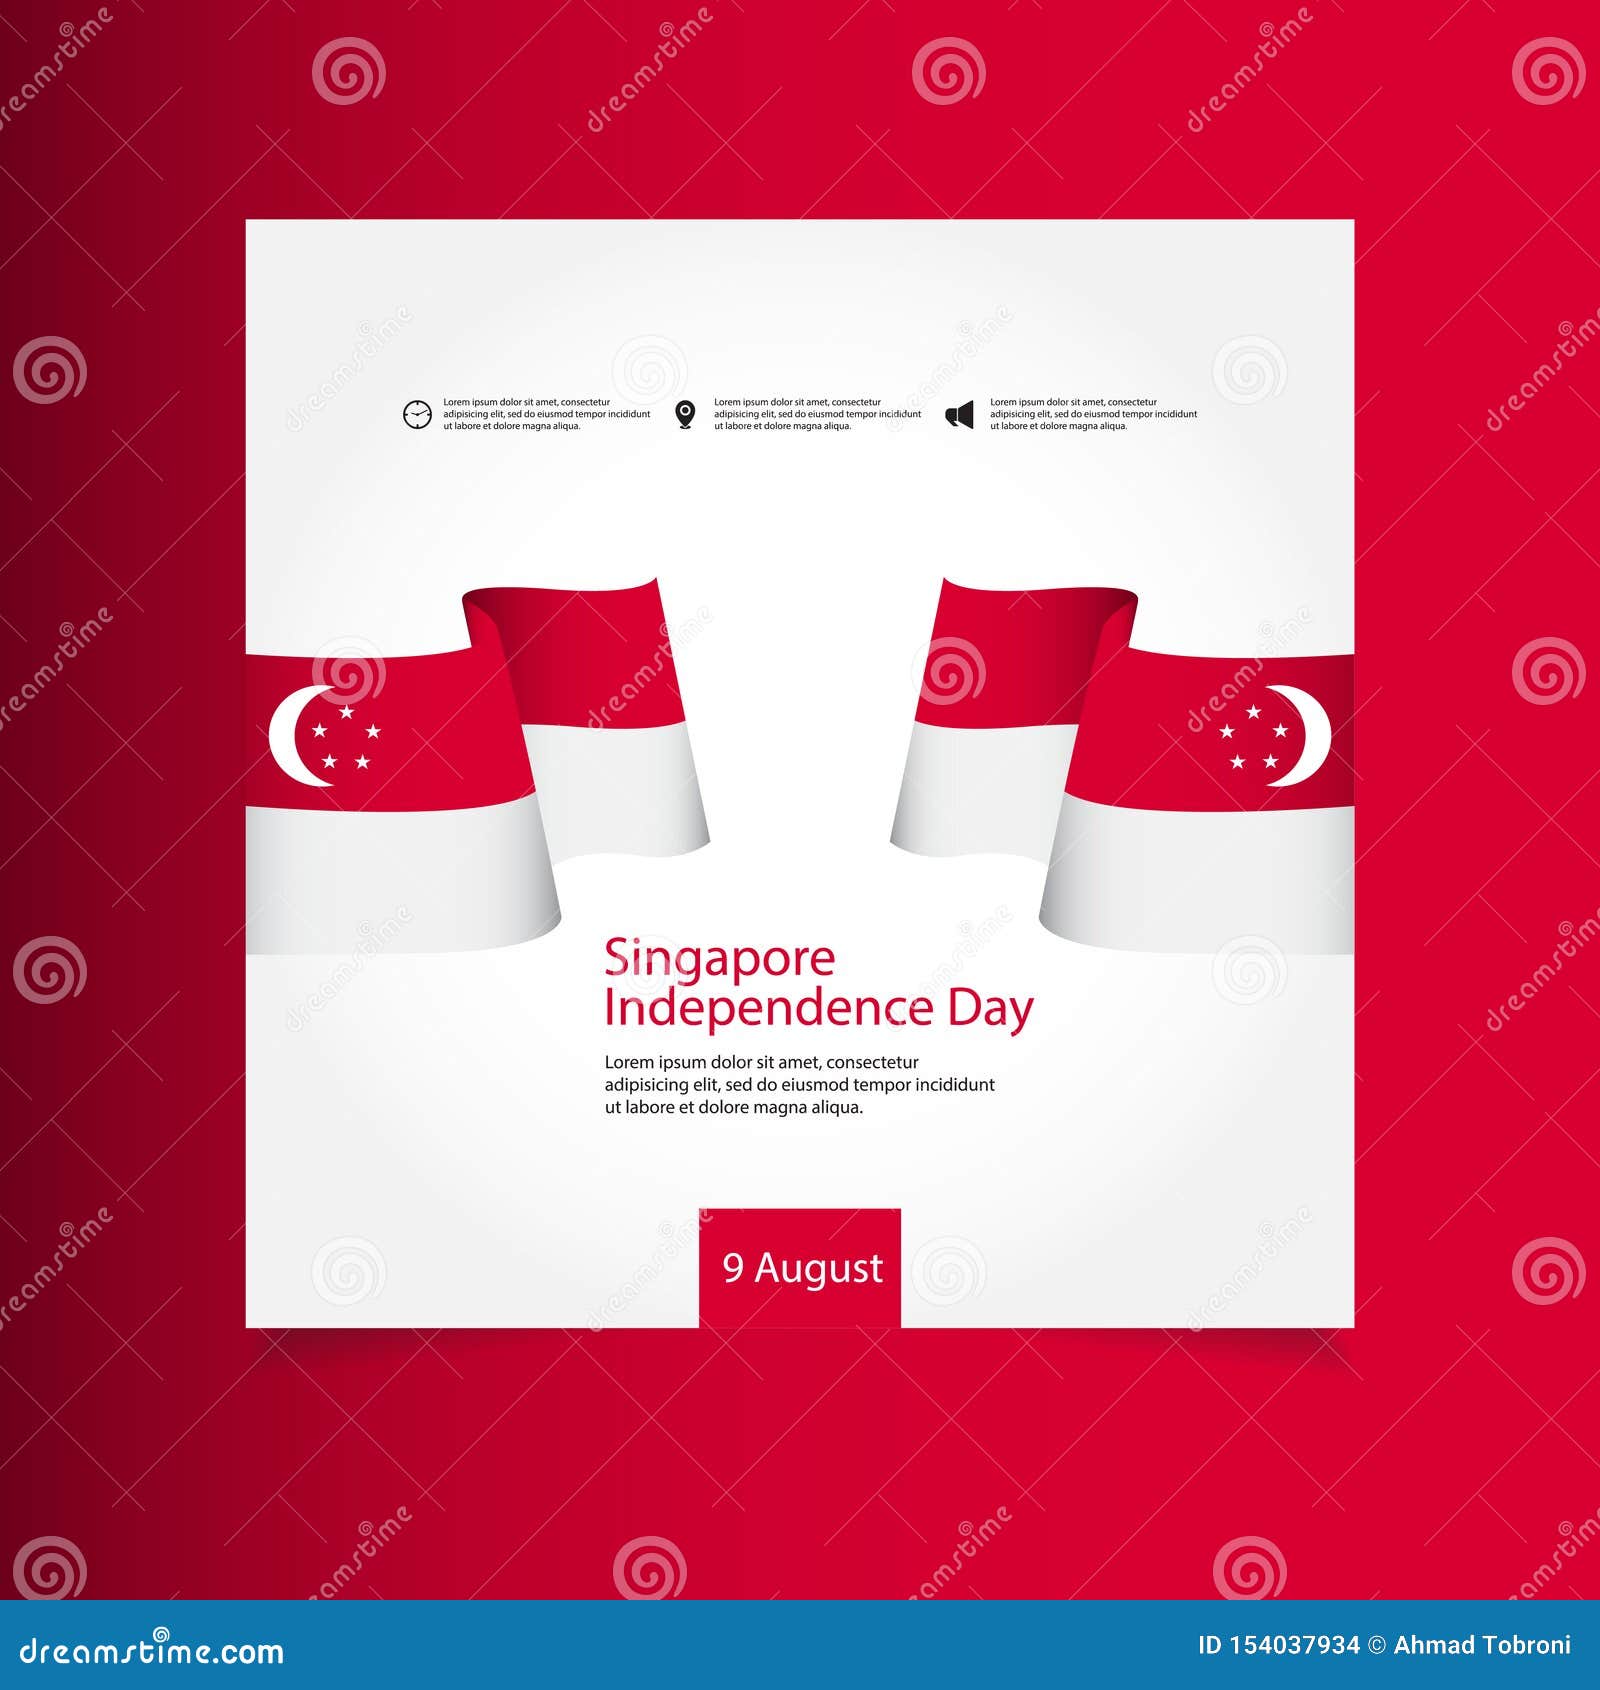 Singapore Independence Day Celebration Vector Template ...